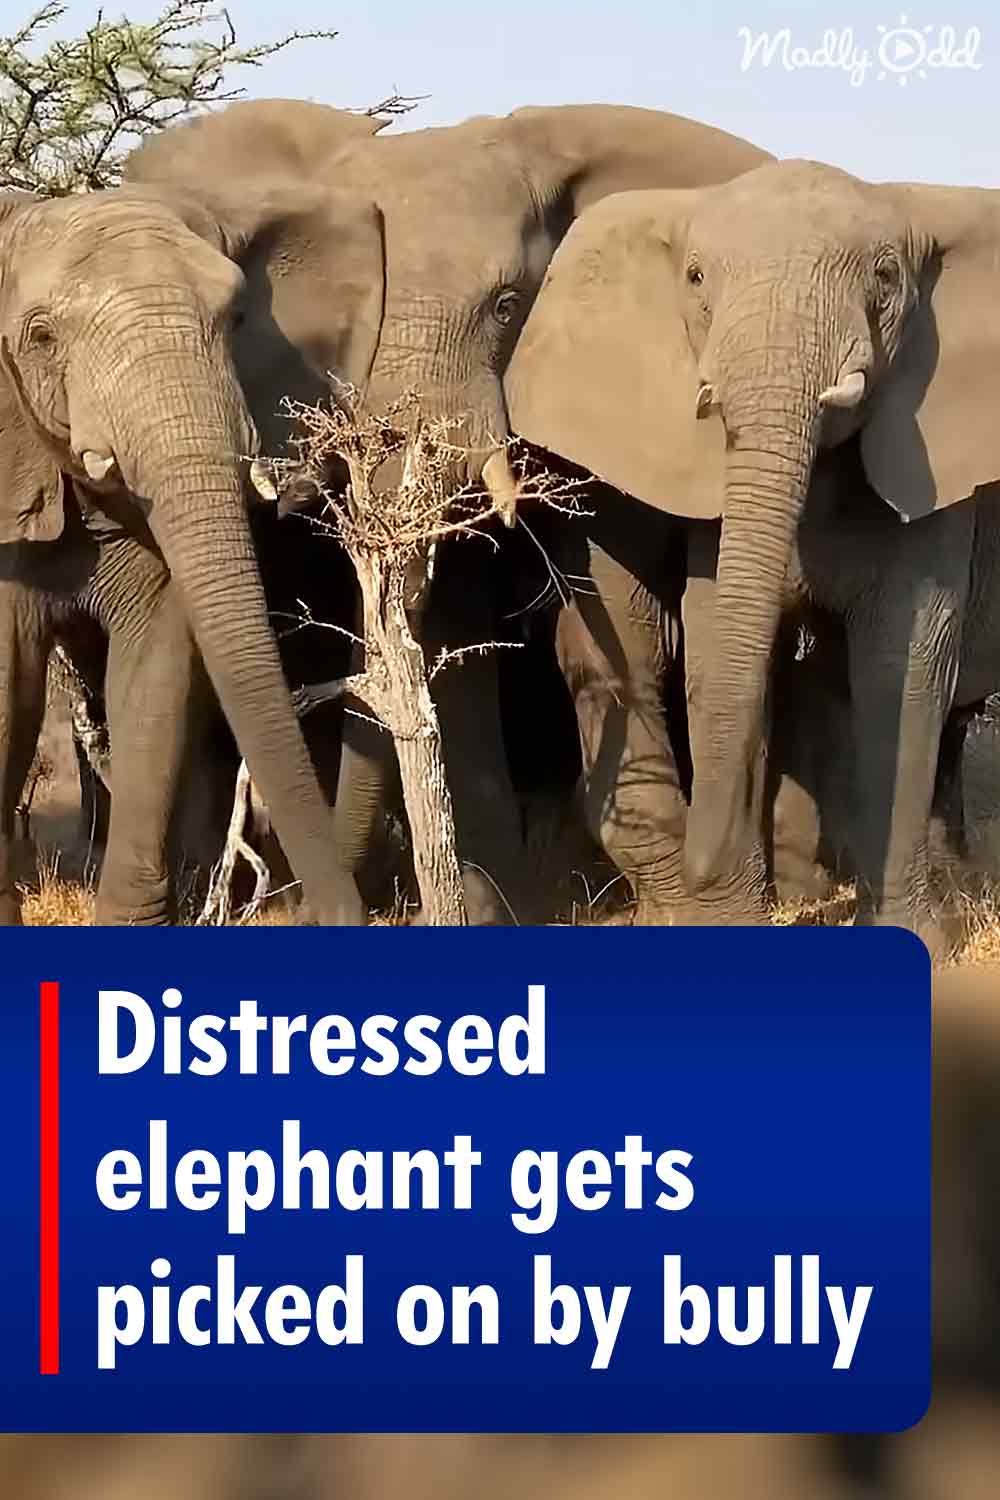 Distressed elephant gets picked on by bully